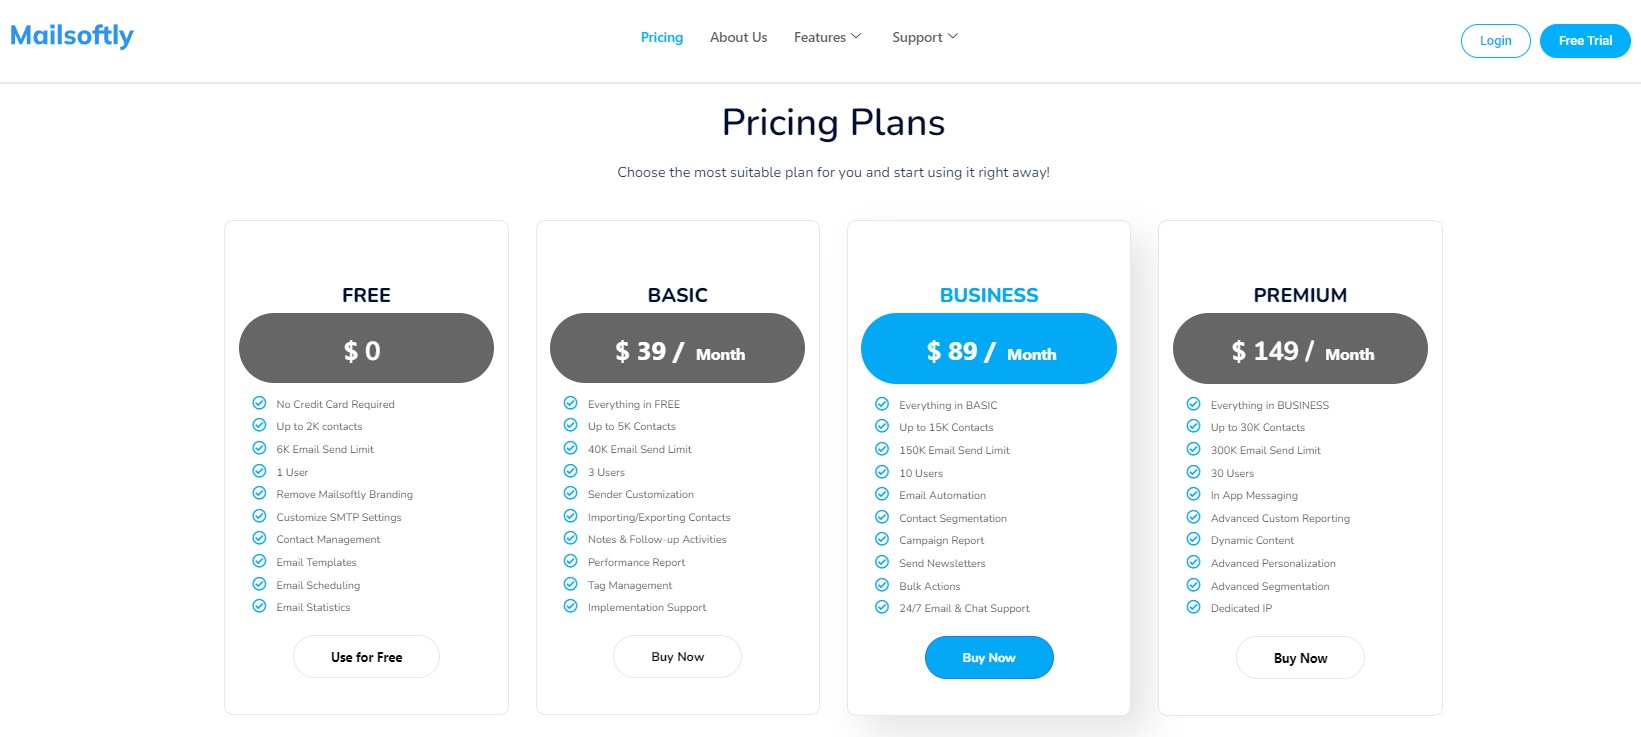 Mailsoftly pricing